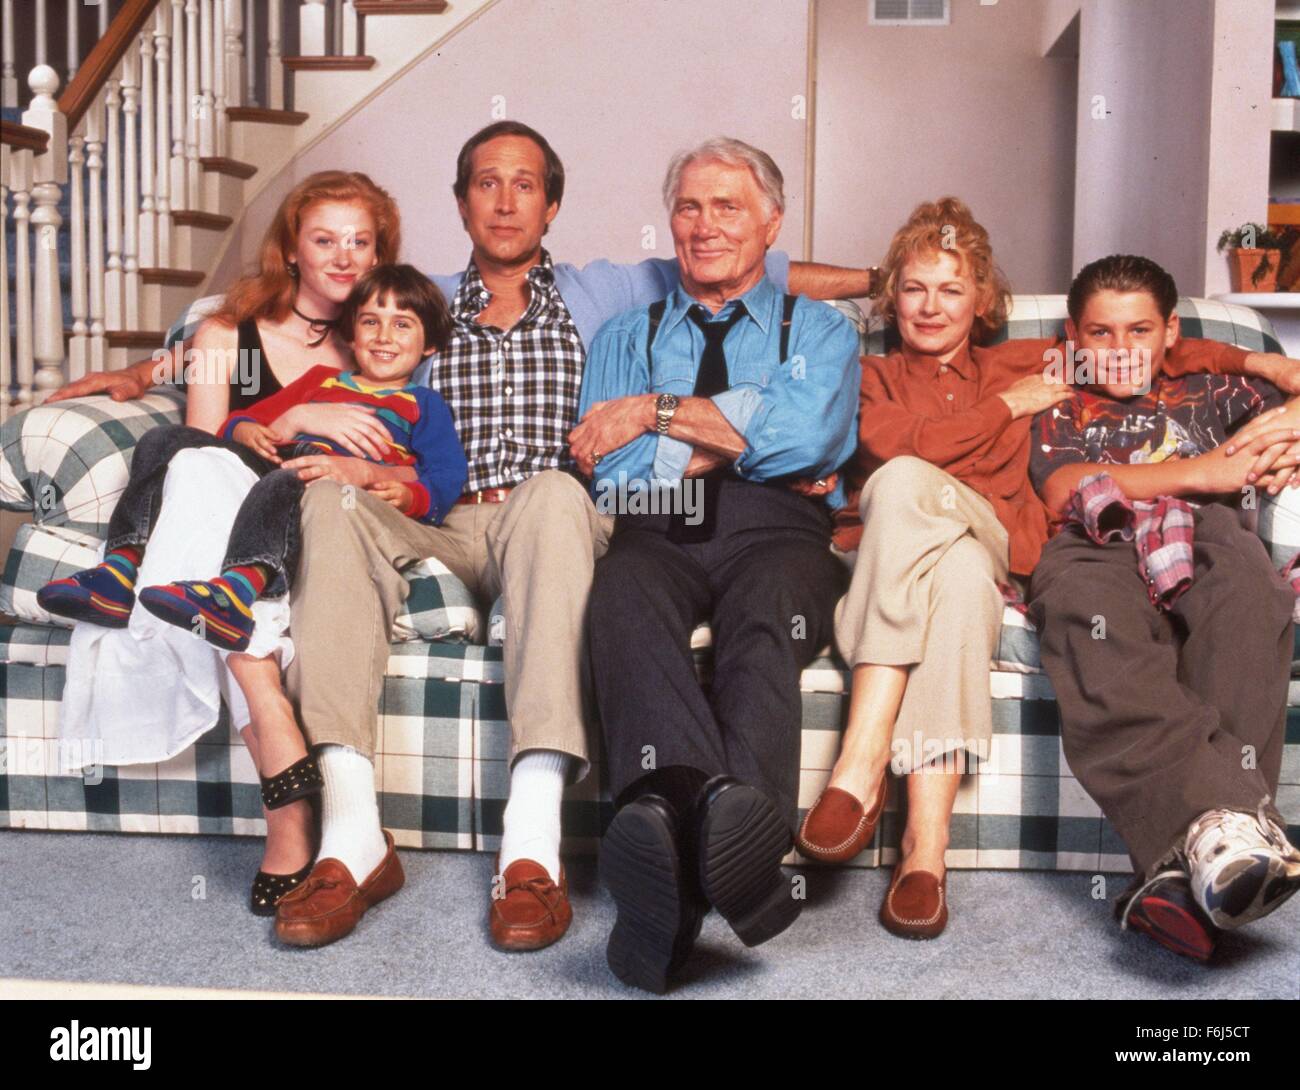 1994, Film Title: COPS AND ROBBERSONS, Director: MICHAEL RITCHIE, Studio: TRI, Pictured: CHEVY CHASE, ENSEMBLE, MIKO HUGHES, FAY MASTERSON, JACK PALANCE, JASON JAMES RICHTER, MICHAEL RITCHIE. (Credit Image: SNAP) Stock Photo